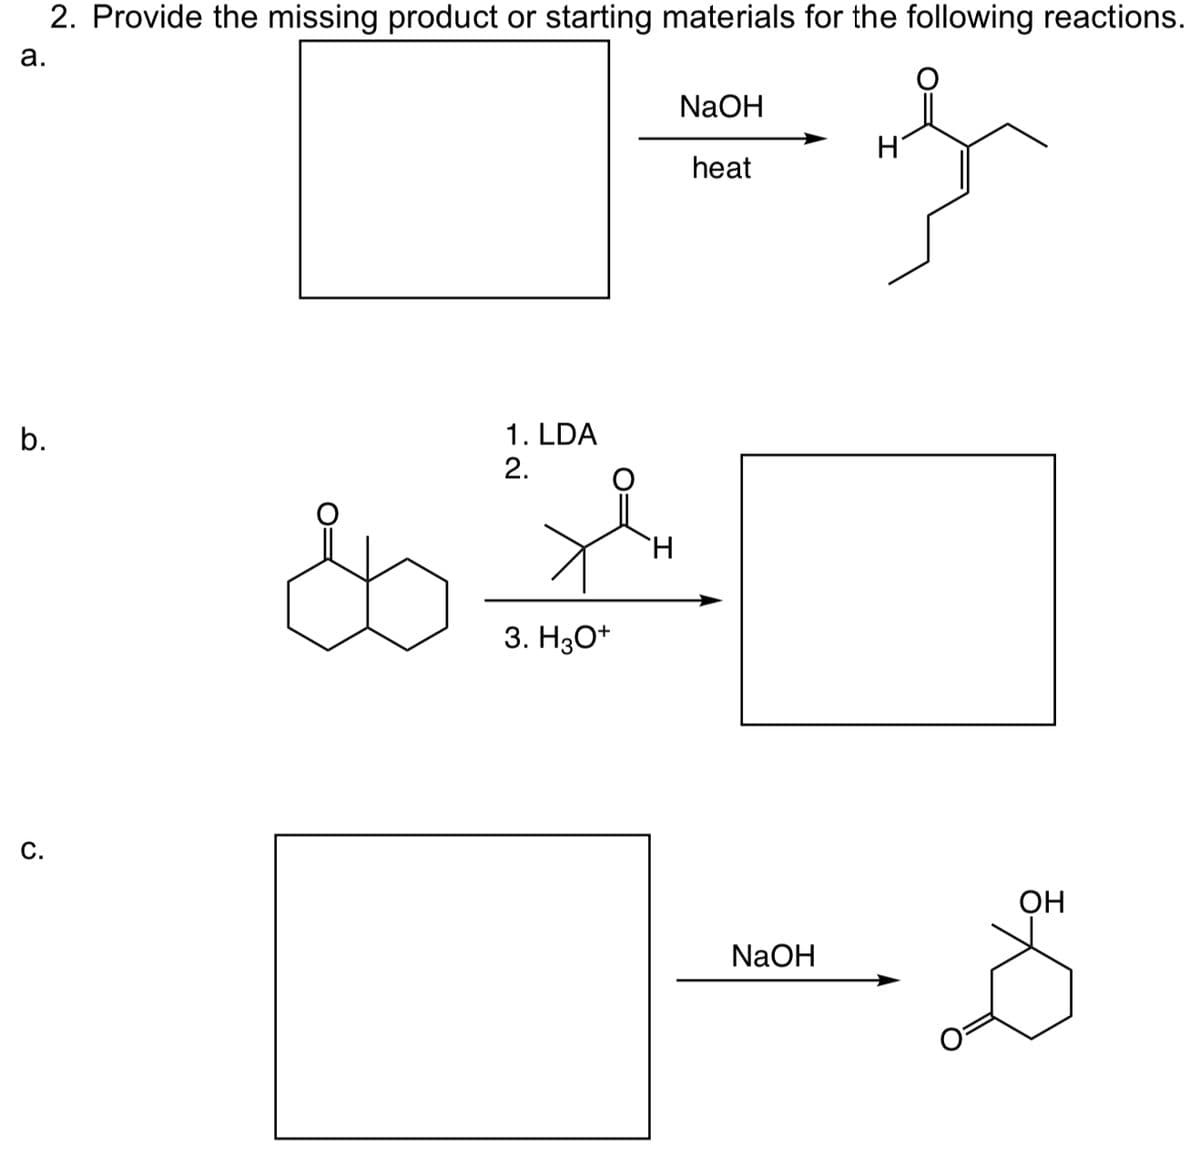 2. Provide the missing product or starting materials for the following reactions.
a.
b.
C.
1. LDA
2.
Xh
H
3. H3O+
NaOH
heat
NaOH
OH